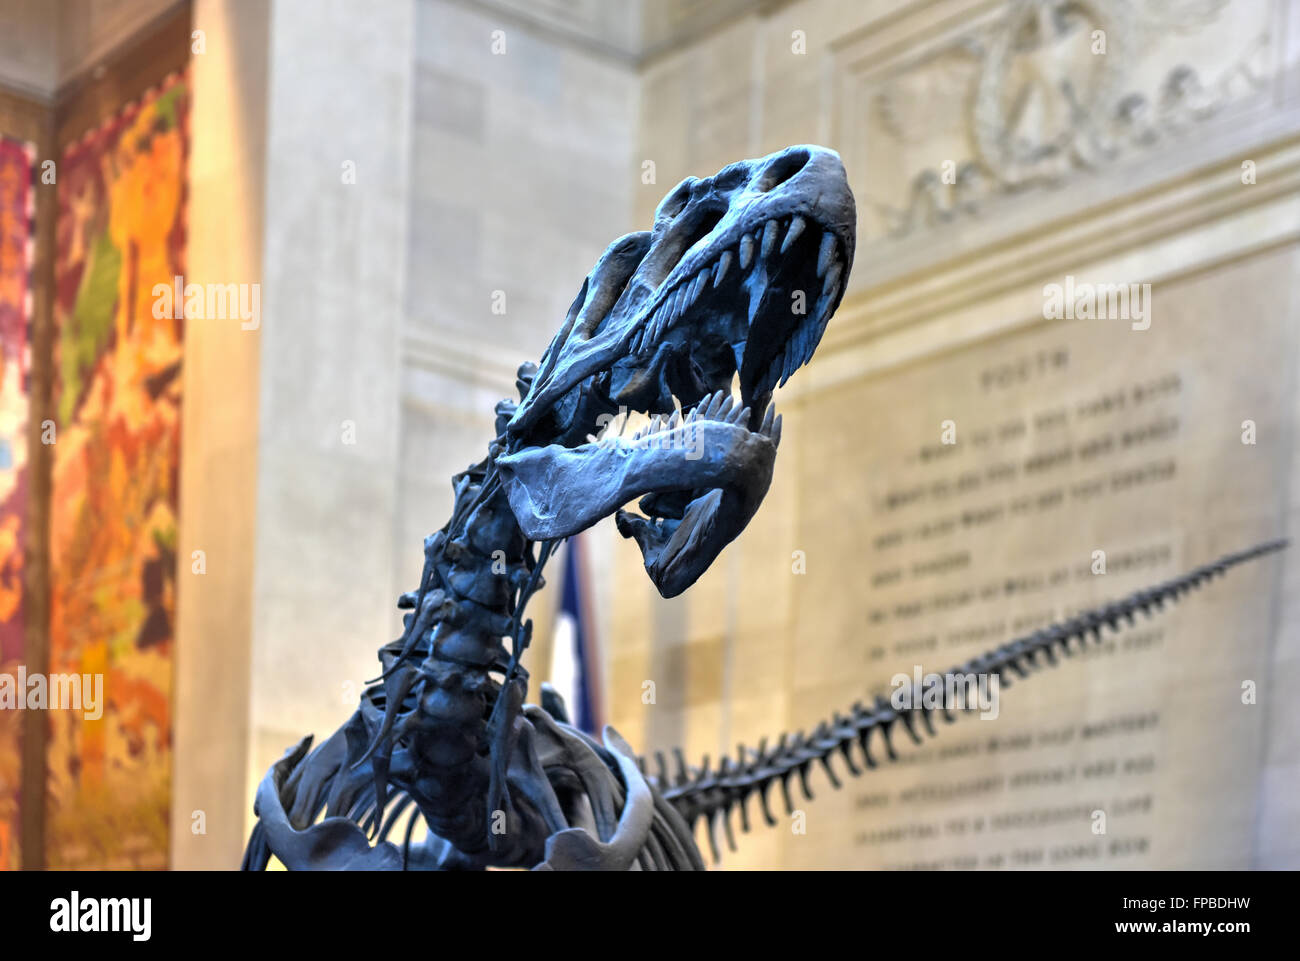 New York City - January 31, 2016: Allosaurus in the entrance hall of the American Museum of Natural History in Manhattan. Stock Photo